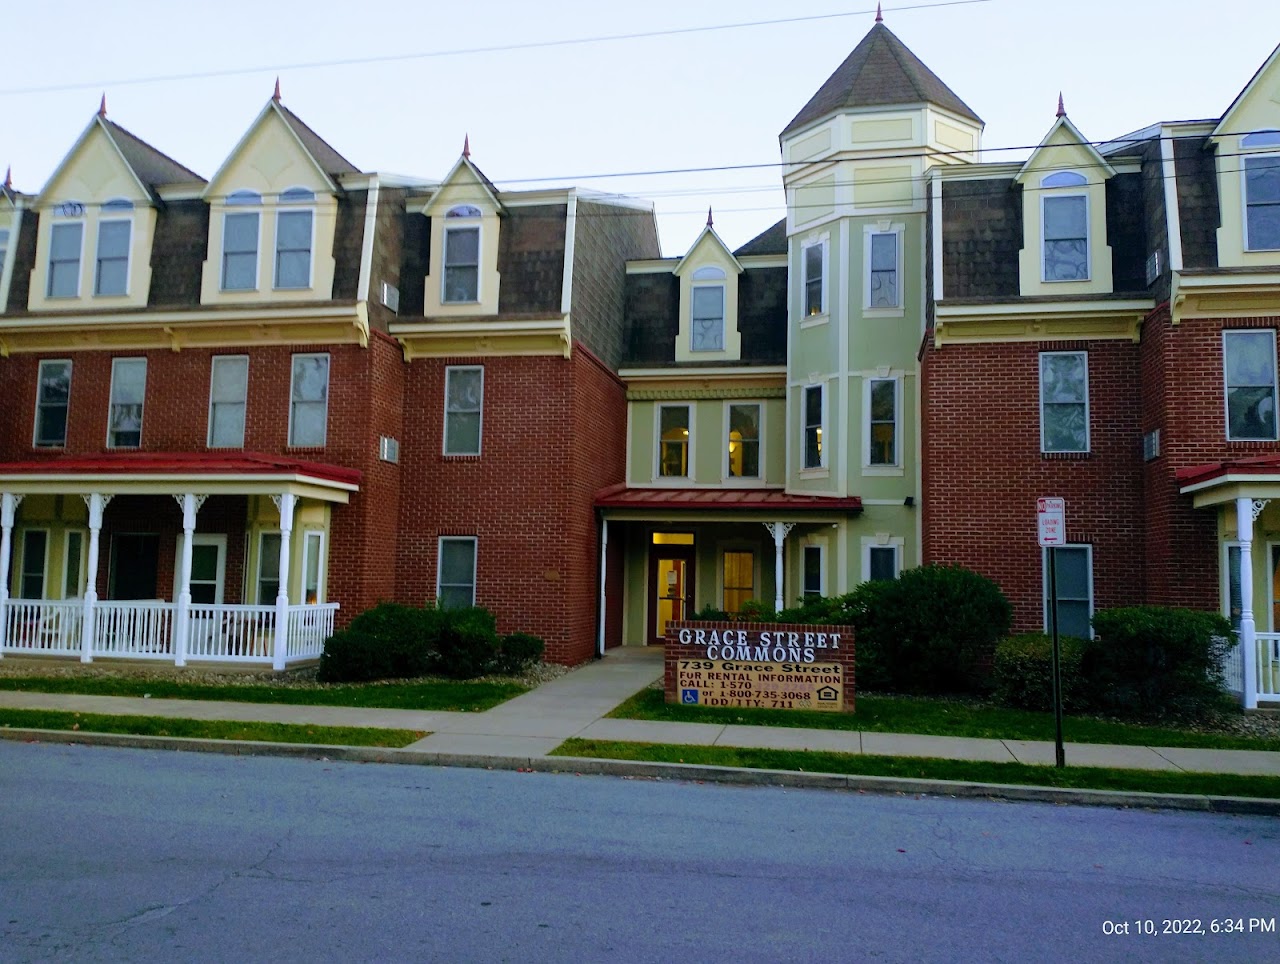 Photo of GRACE STREET COMMONS. Affordable housing located at 739 GRACE ST WILLIAMSPORT, PA 17701